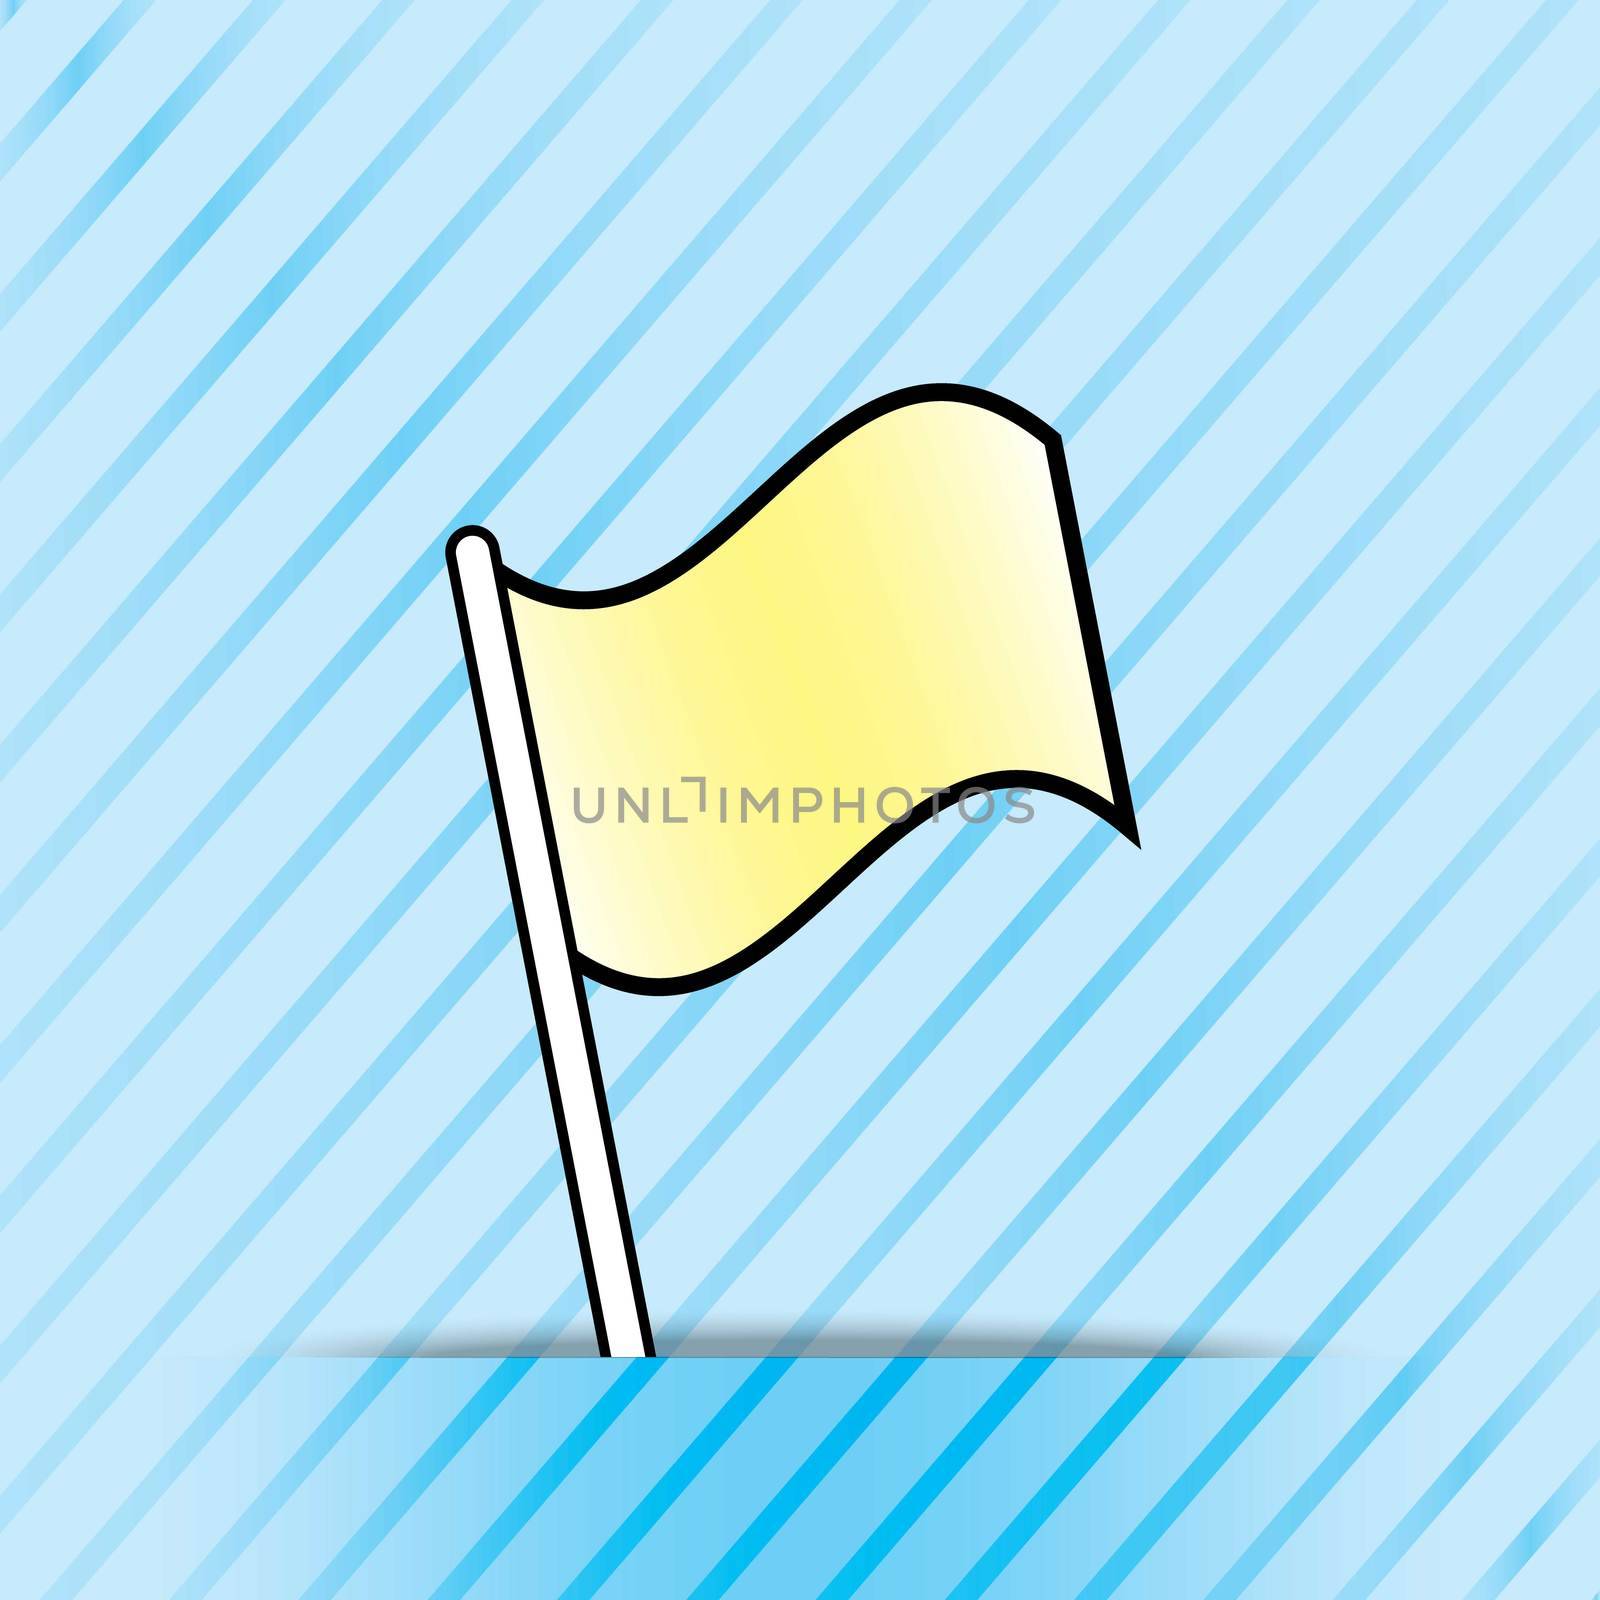 An Illustration of an empty flag on blue background